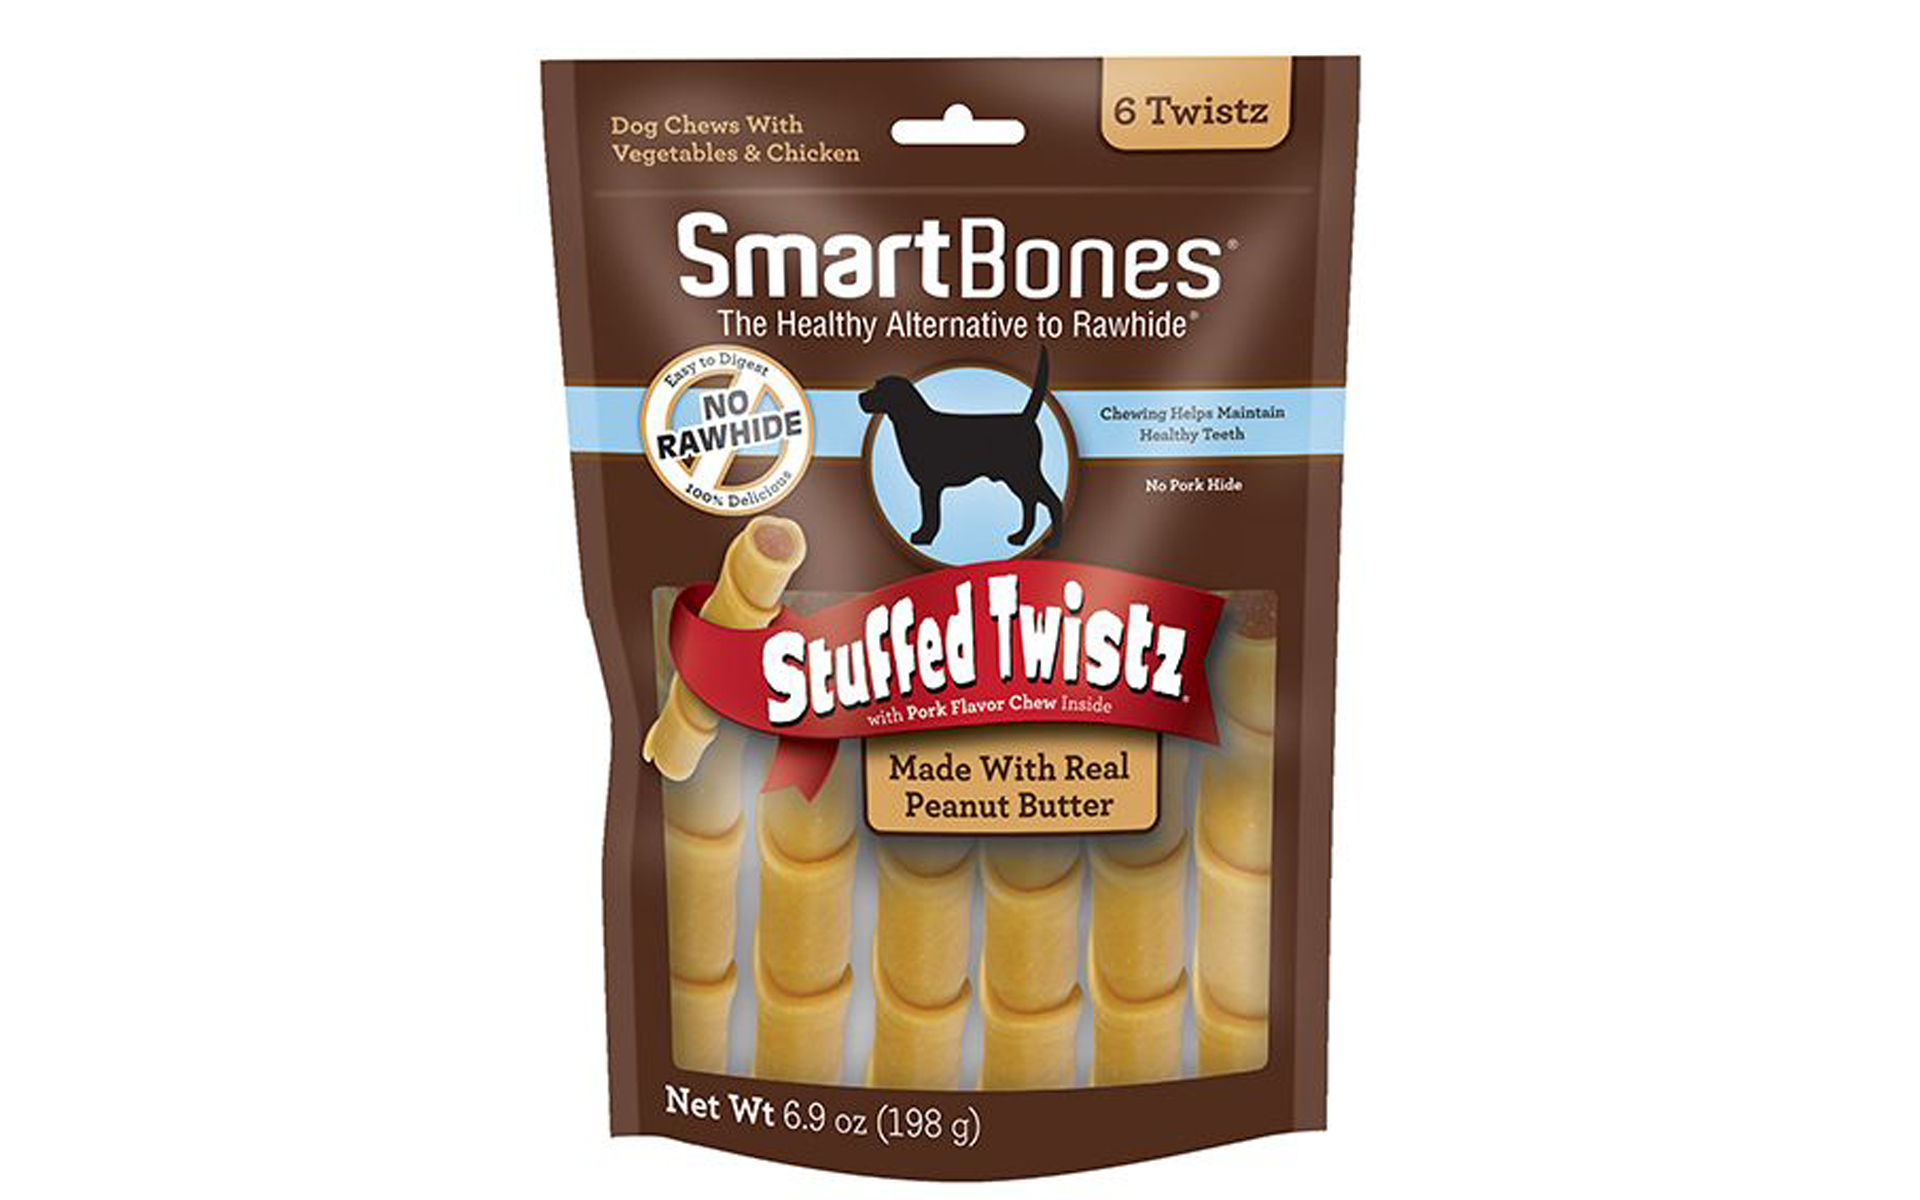 Stuffed Twistz with Real Peanut Butter